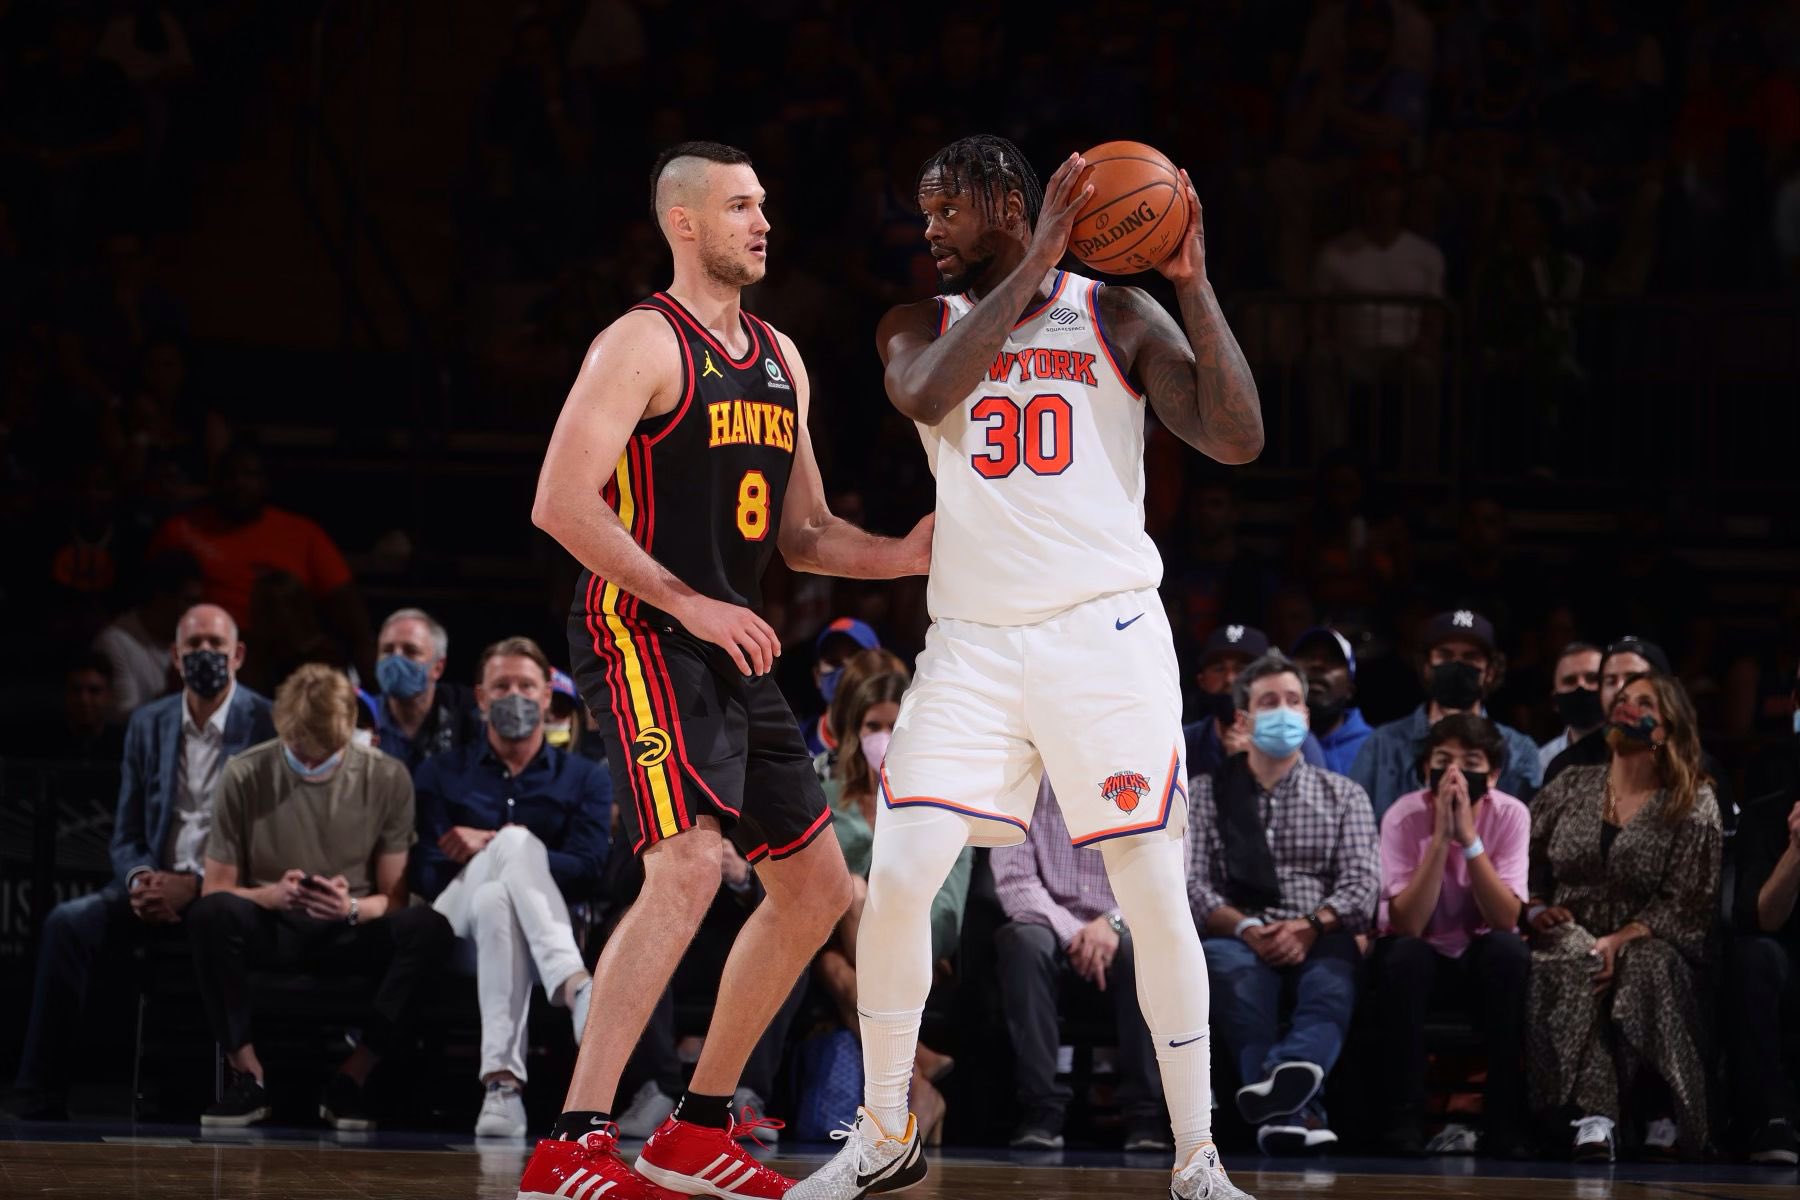 Danilo Gallinari On Twitter We Needed A Win In New York And We Took It At The First Game Great Win And Best Start Of The Series Truetoatlanta Https T Co Xewvrmhxrh